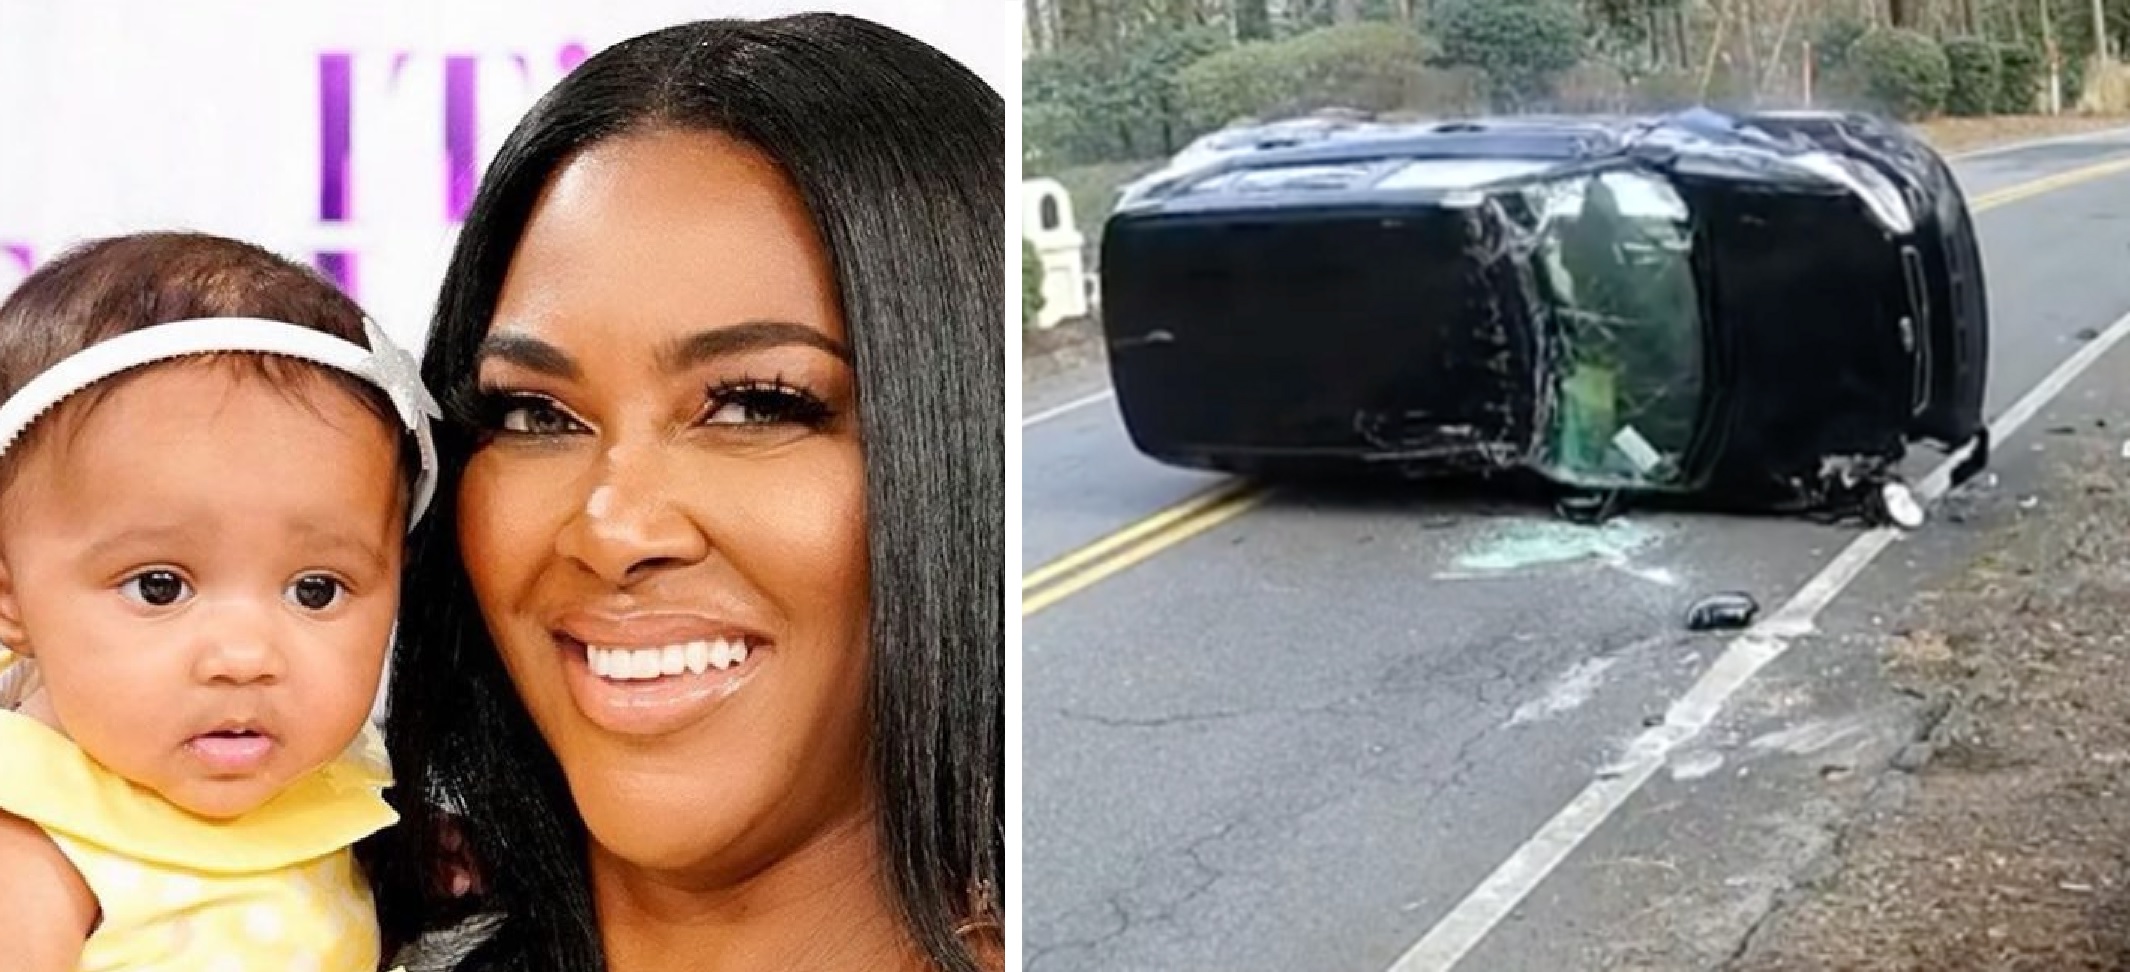 Kenya Moore Shares ‘Close Call’ Footage When a Car Brutally Struck Her Concrete Mailbox